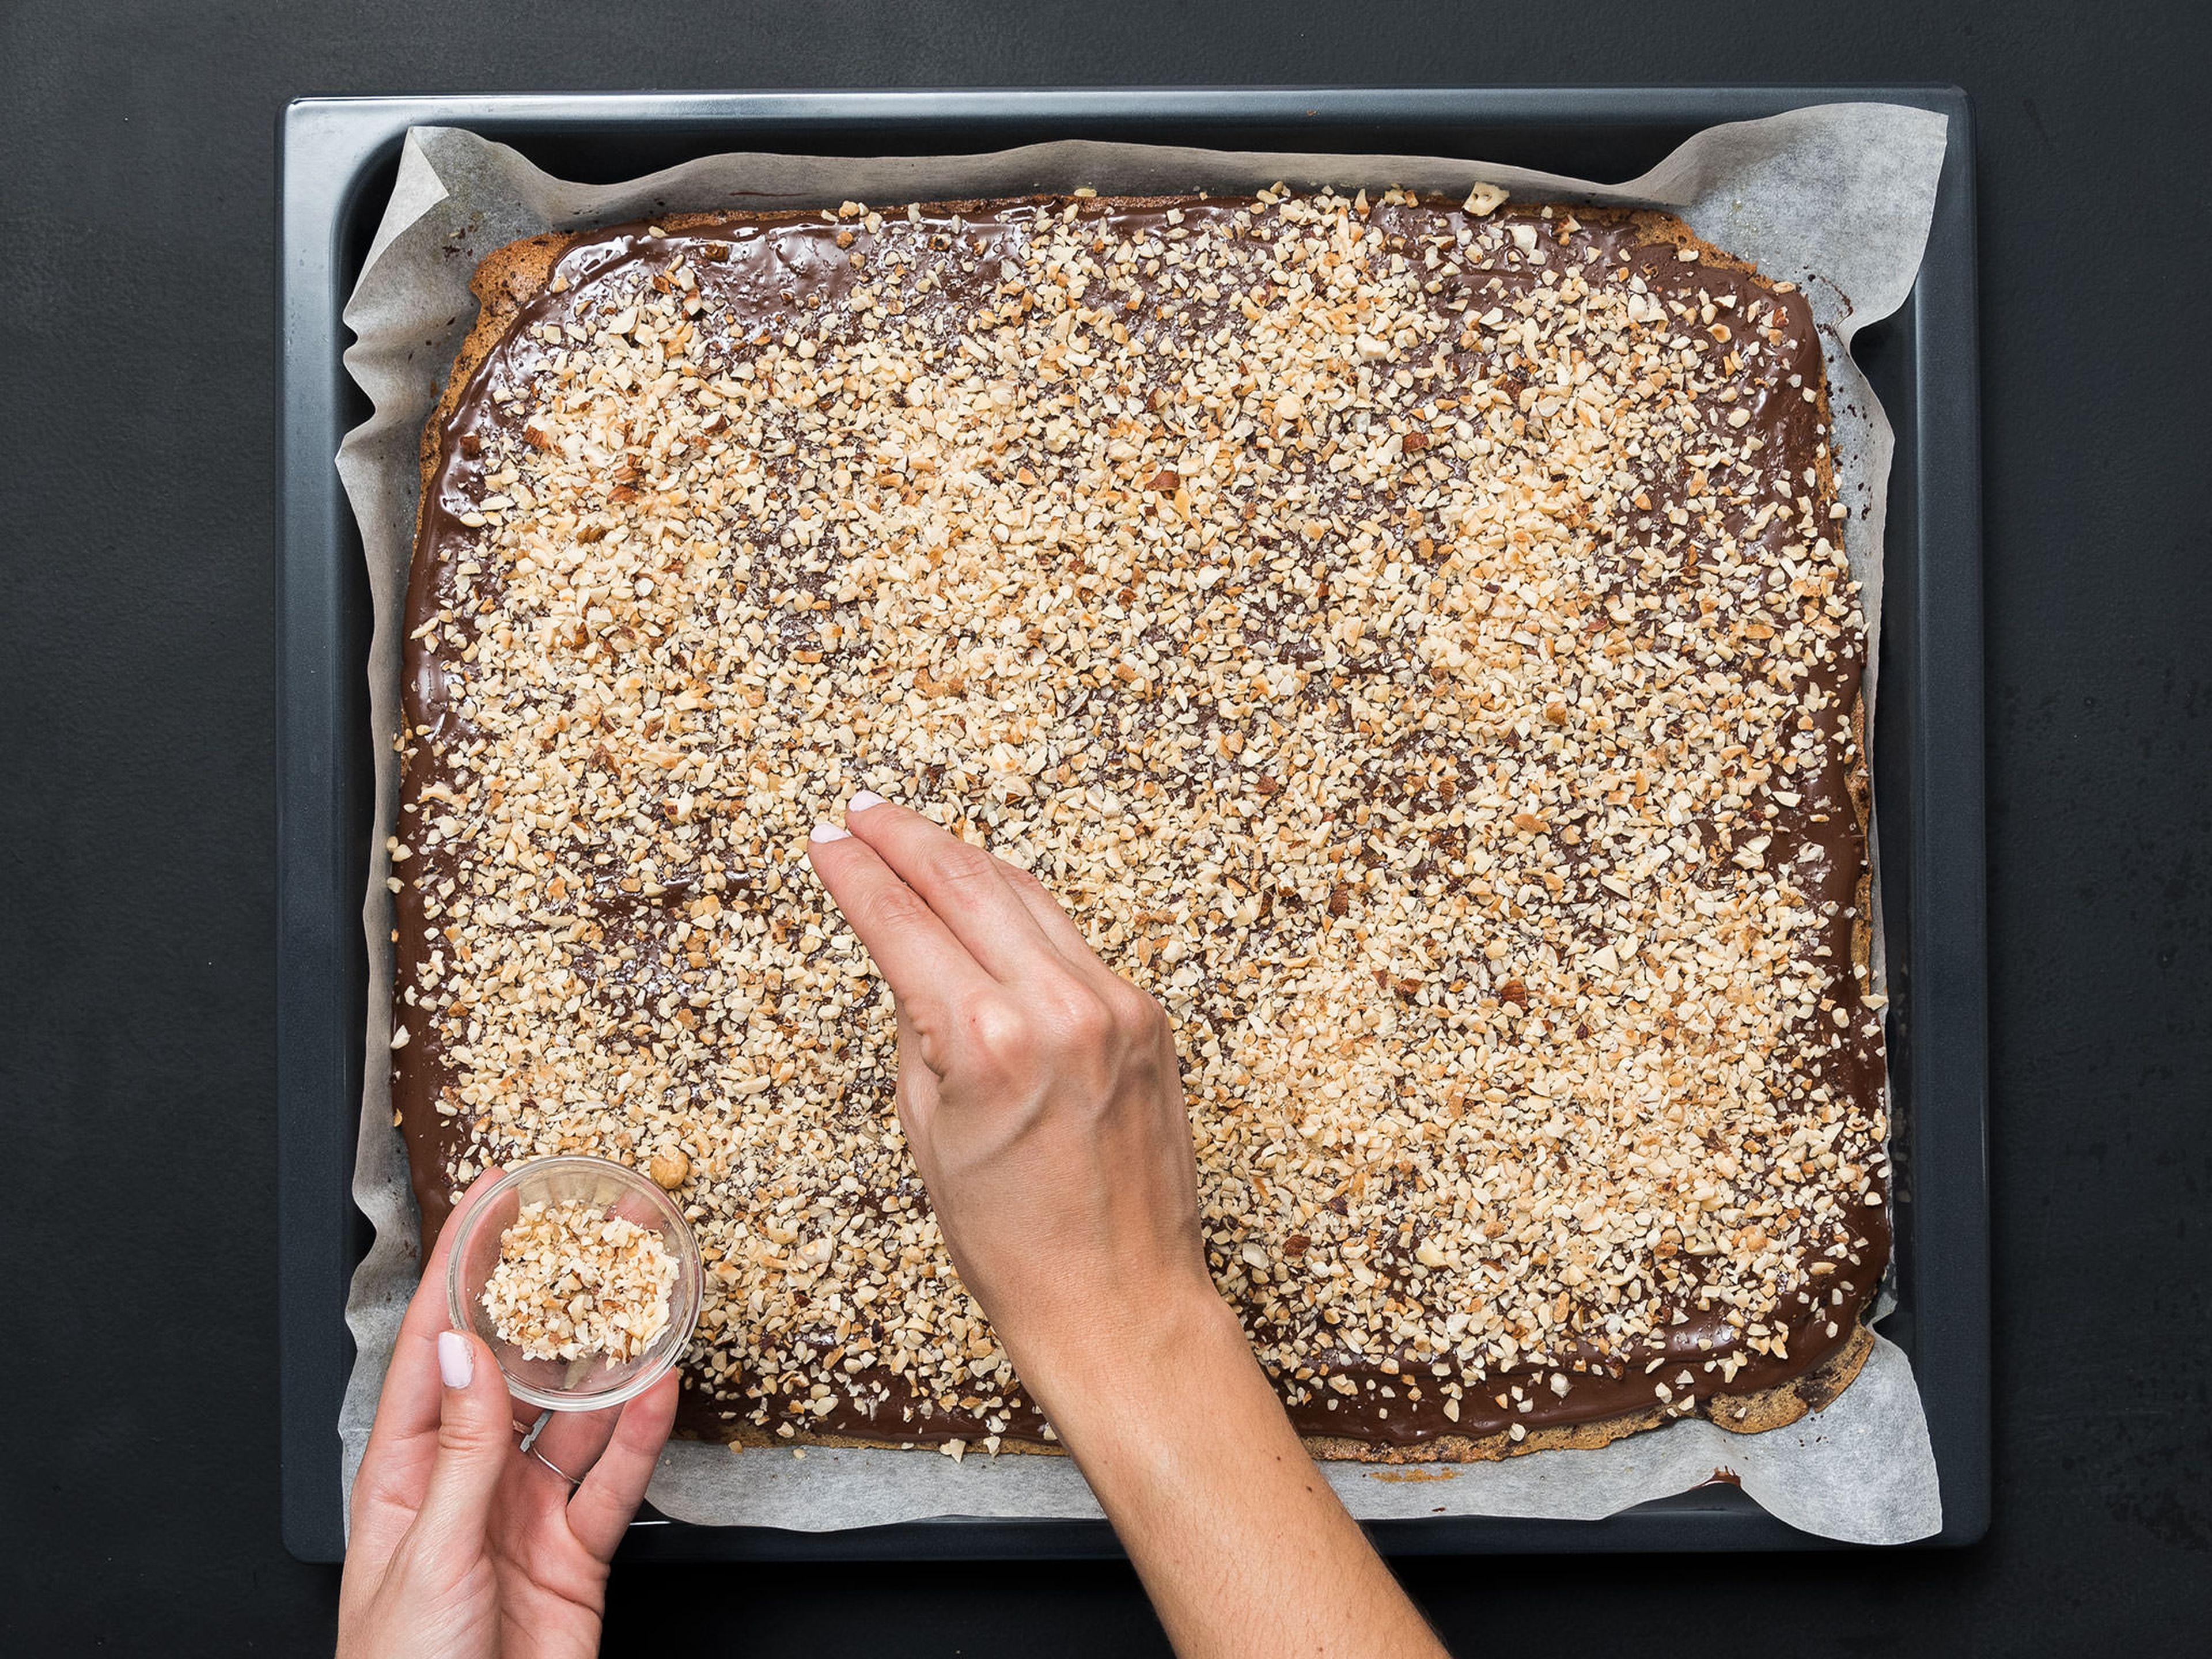 Spread melted chocolate over the cooled bars. Sprinkle the chopped nuts on top. Leave to dry for approx. 30 min. and cut into rectangles for serving. Enjoy!